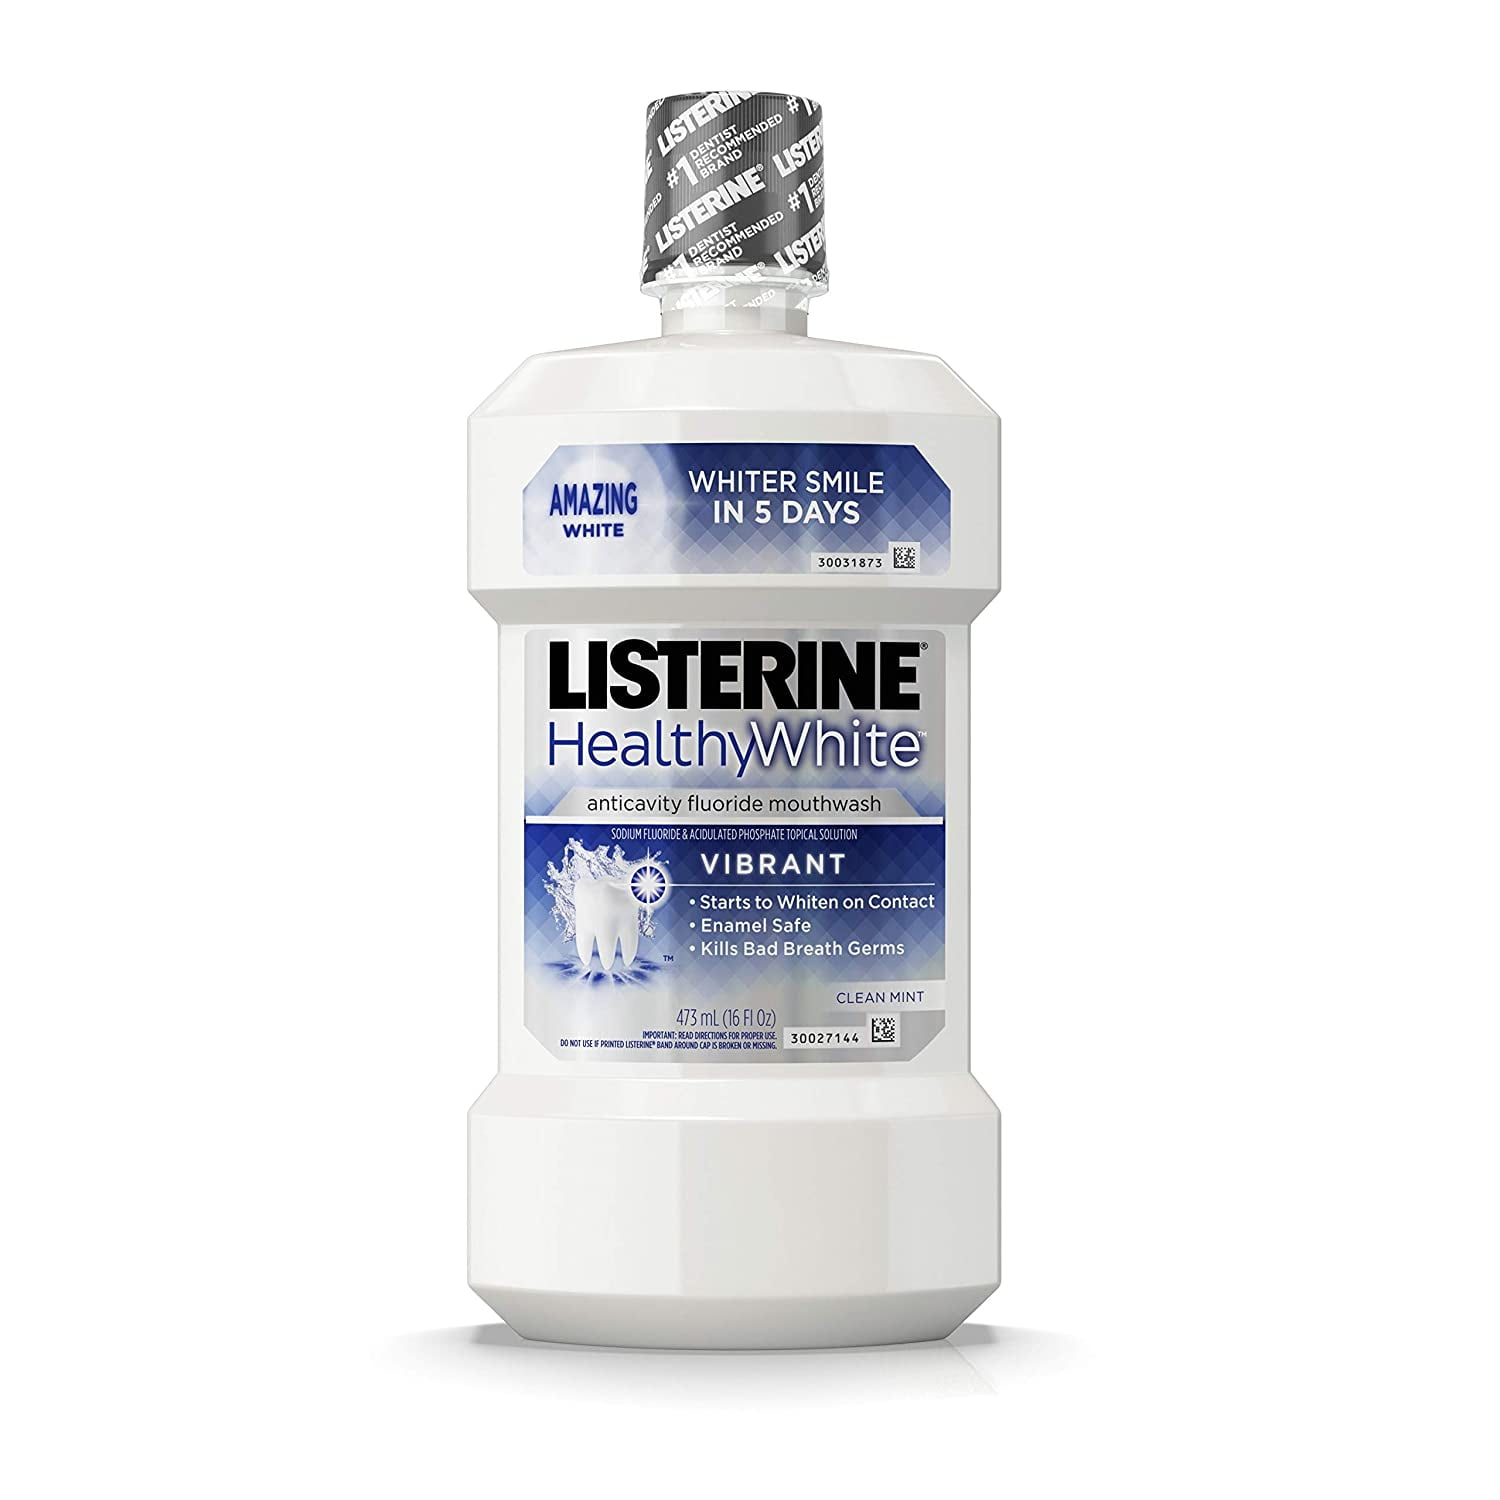 Listerine Healthy White Vibrant Multi-Action Fluoride Mouth Rinse